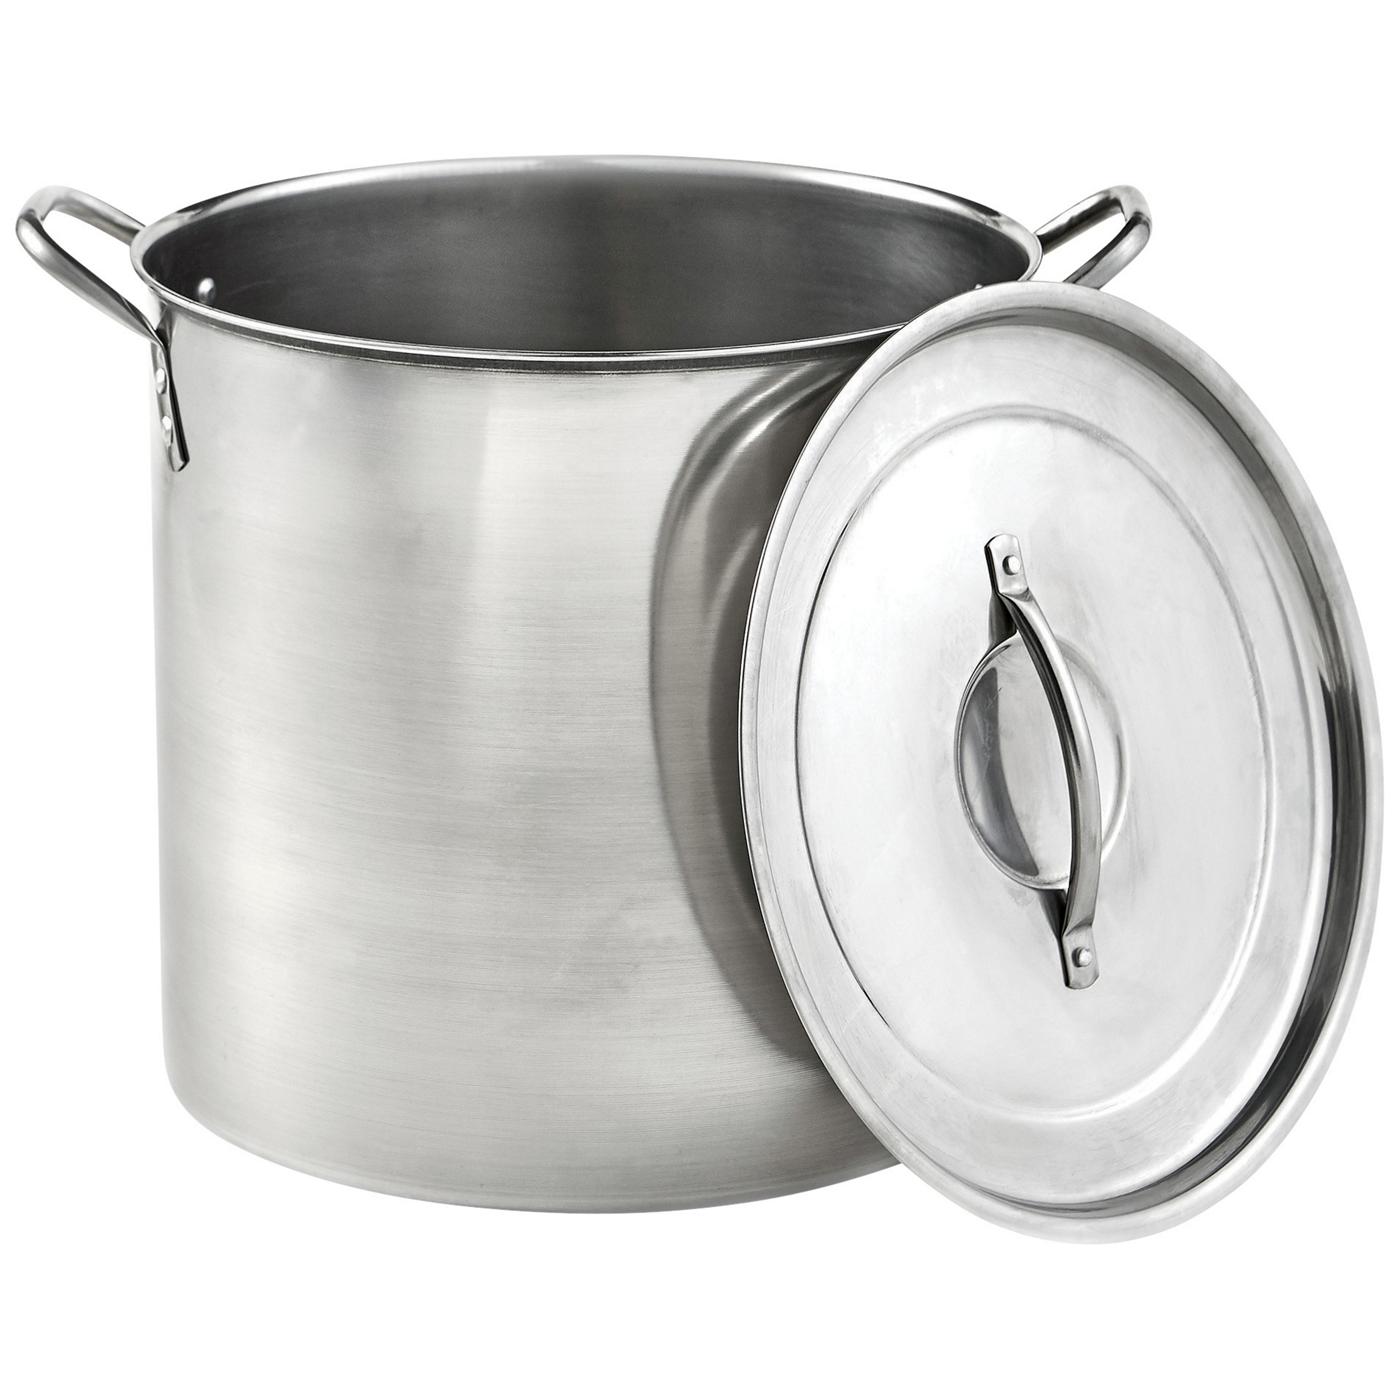 Imusa Stainless Steel Stock Pot with Lid - Shop Stock Pots & Sauce